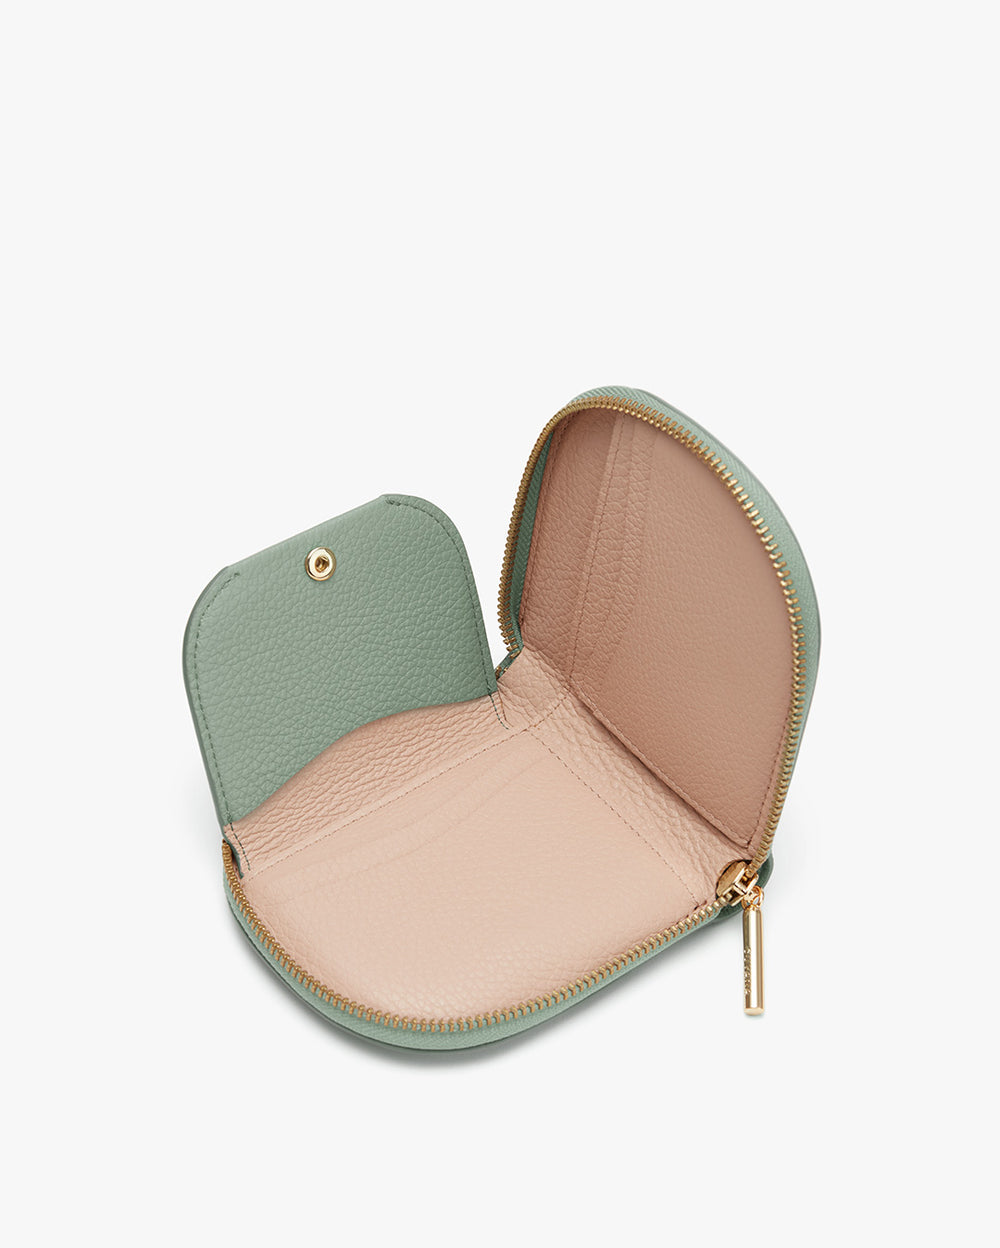 Open heart-shaped small case with zipper.